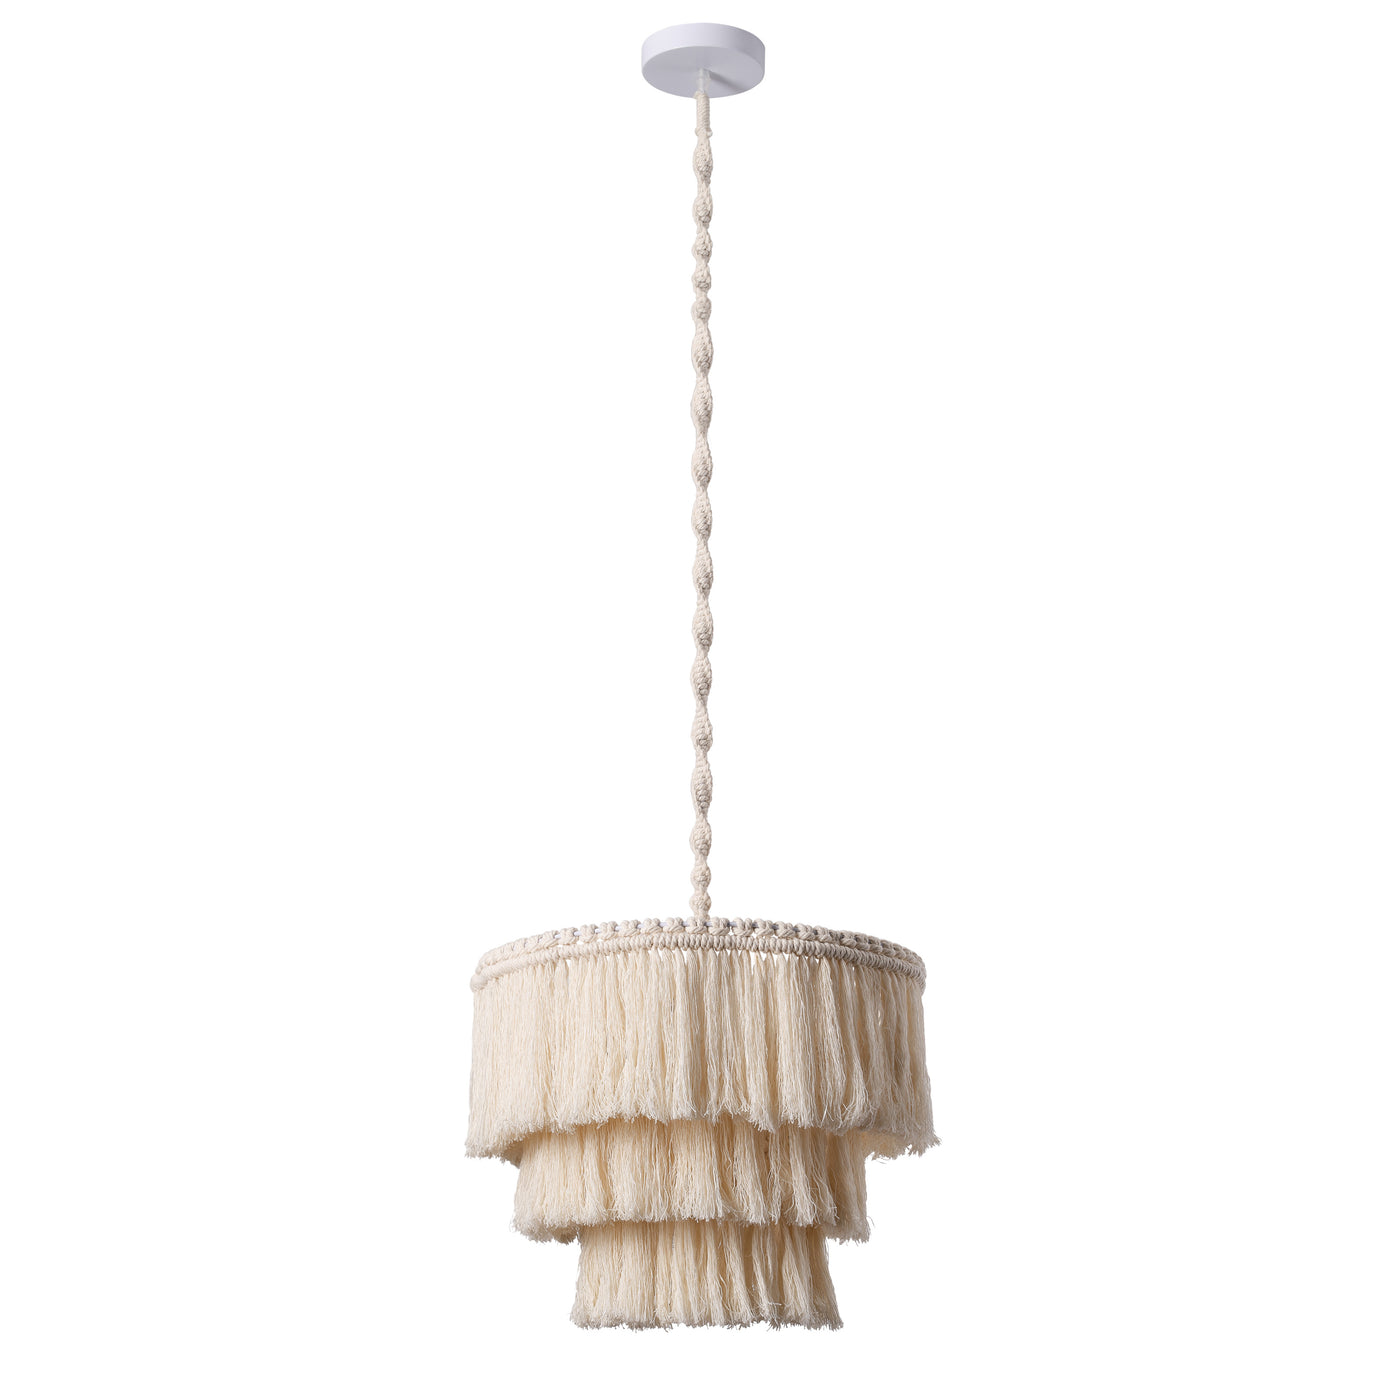 1-Light Multi-layer Design With Cotton Wool Chandelier